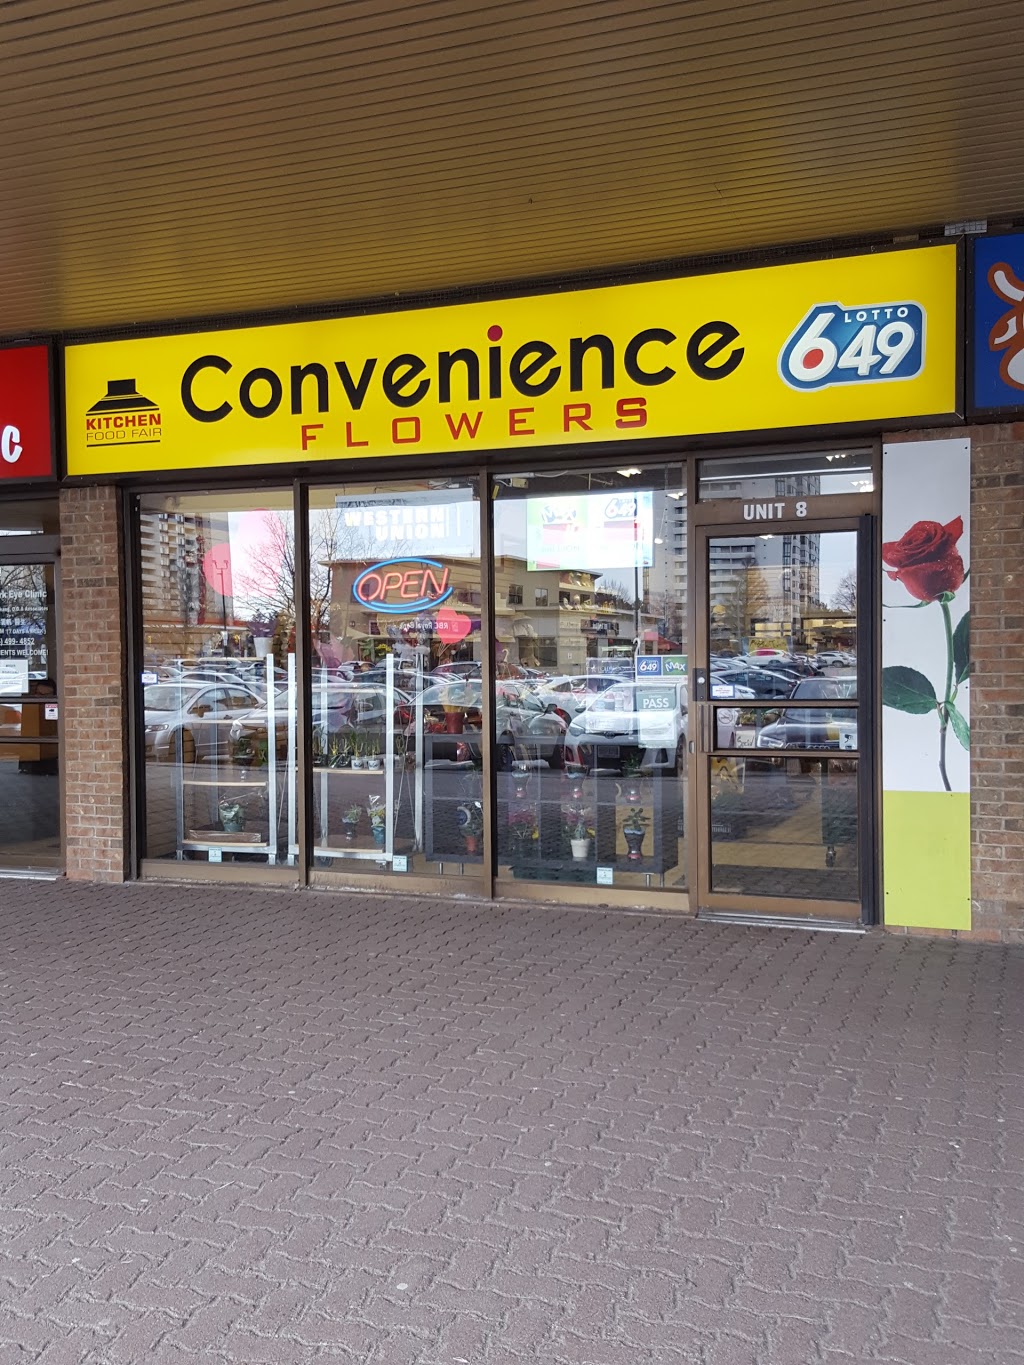 Kitchen Food Fair Convenience and Flowers | 3555 Don Mills Rd #8, North York, ON M2H 3N3, Canada | Phone: (416) 494-1222